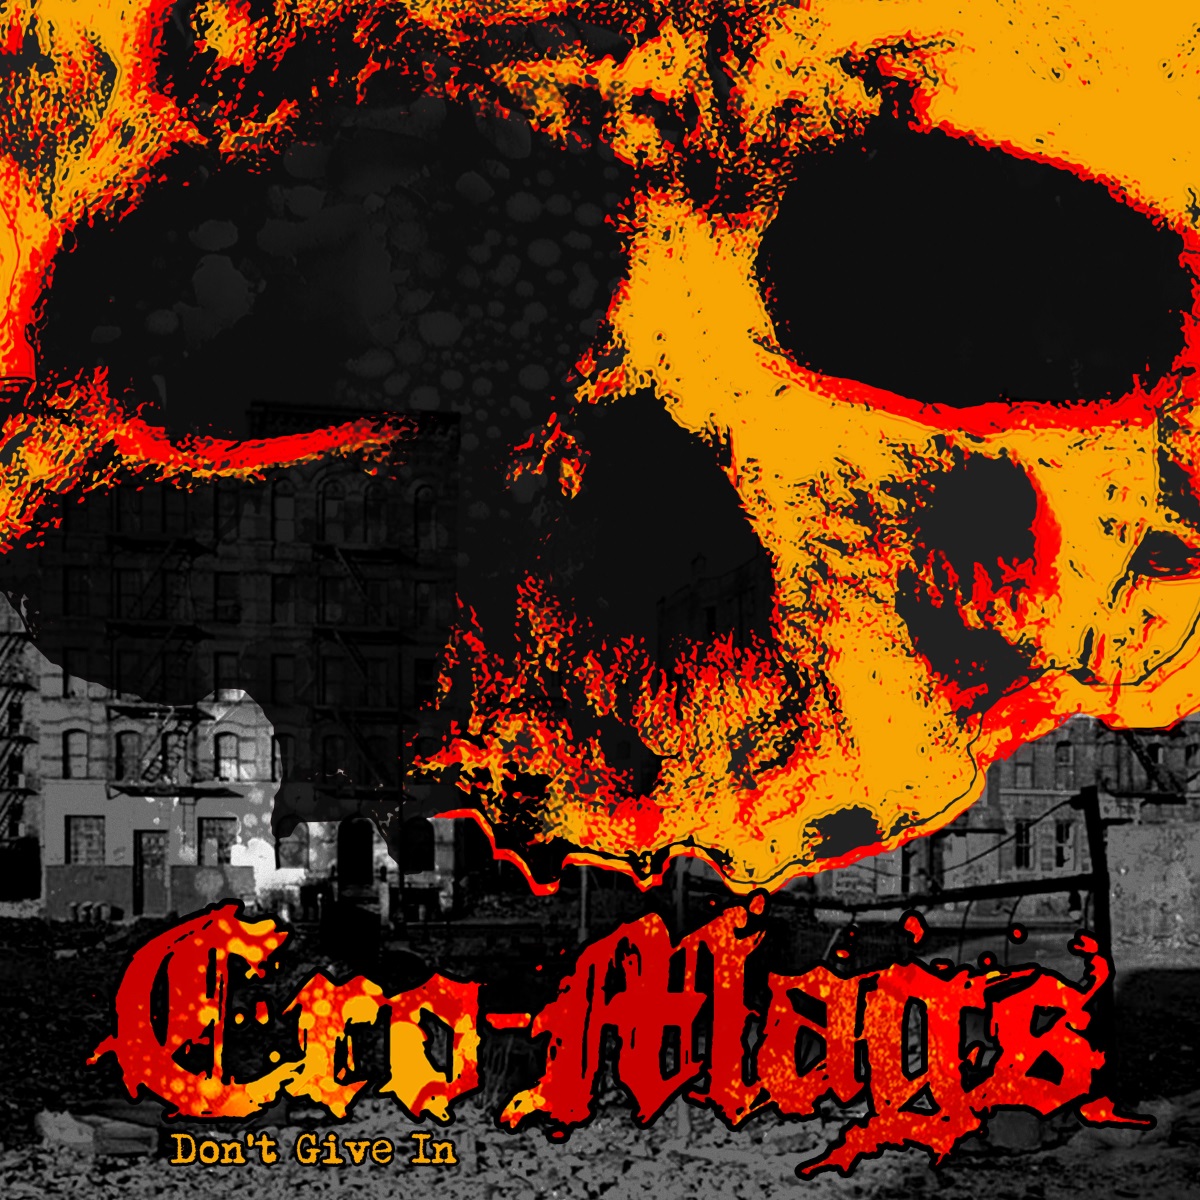 CRO MAGS new EP